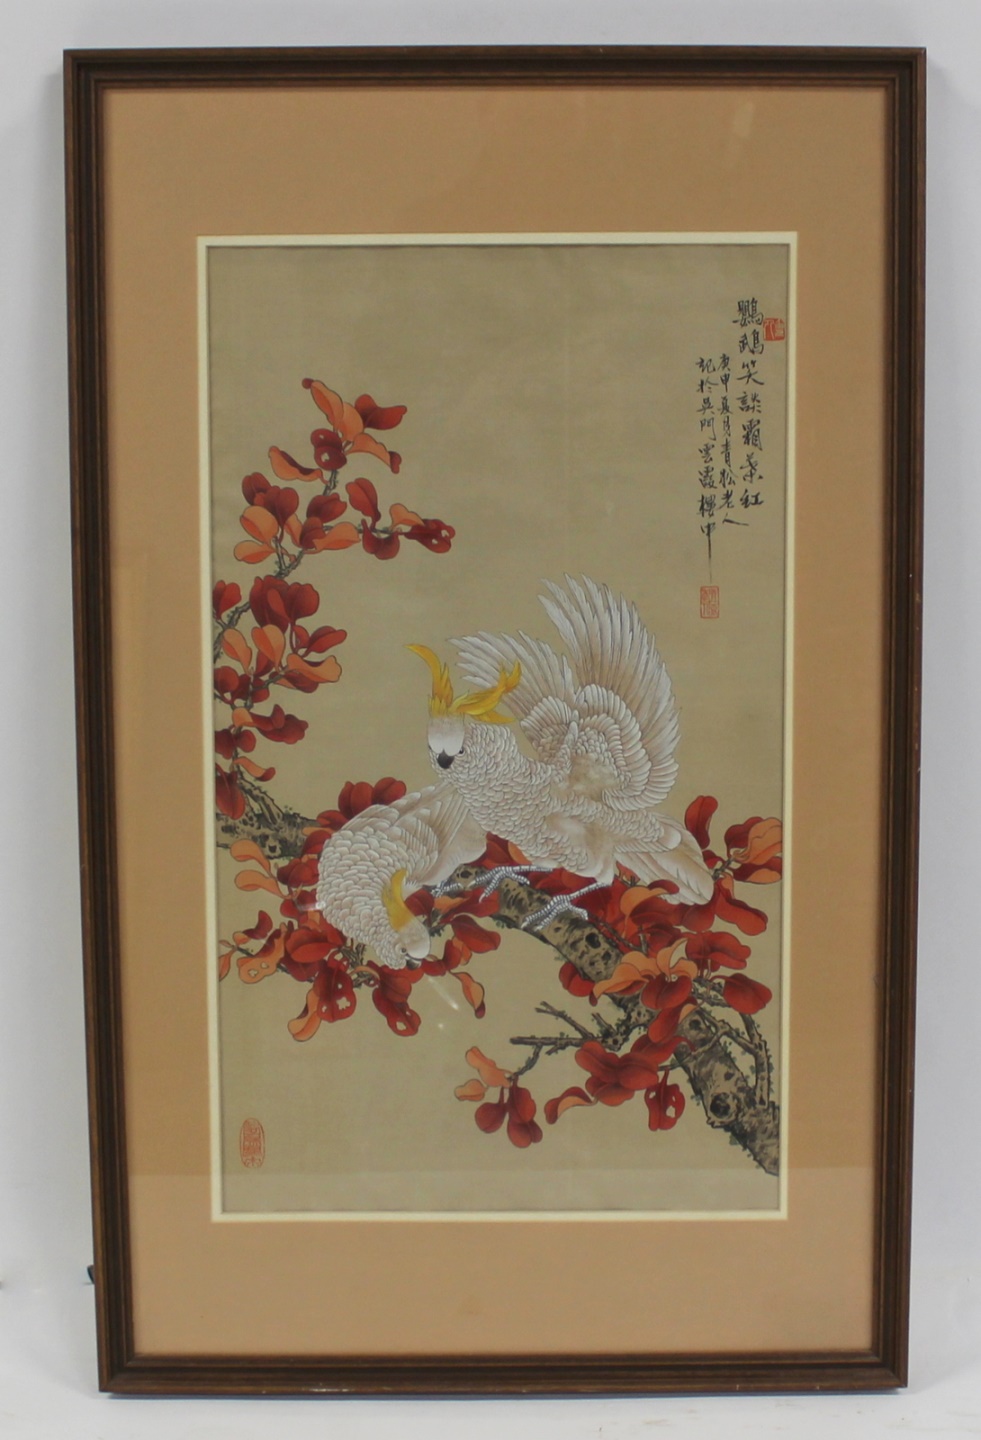 SIGNED CONTEMPORARY ASIAN PAINTING